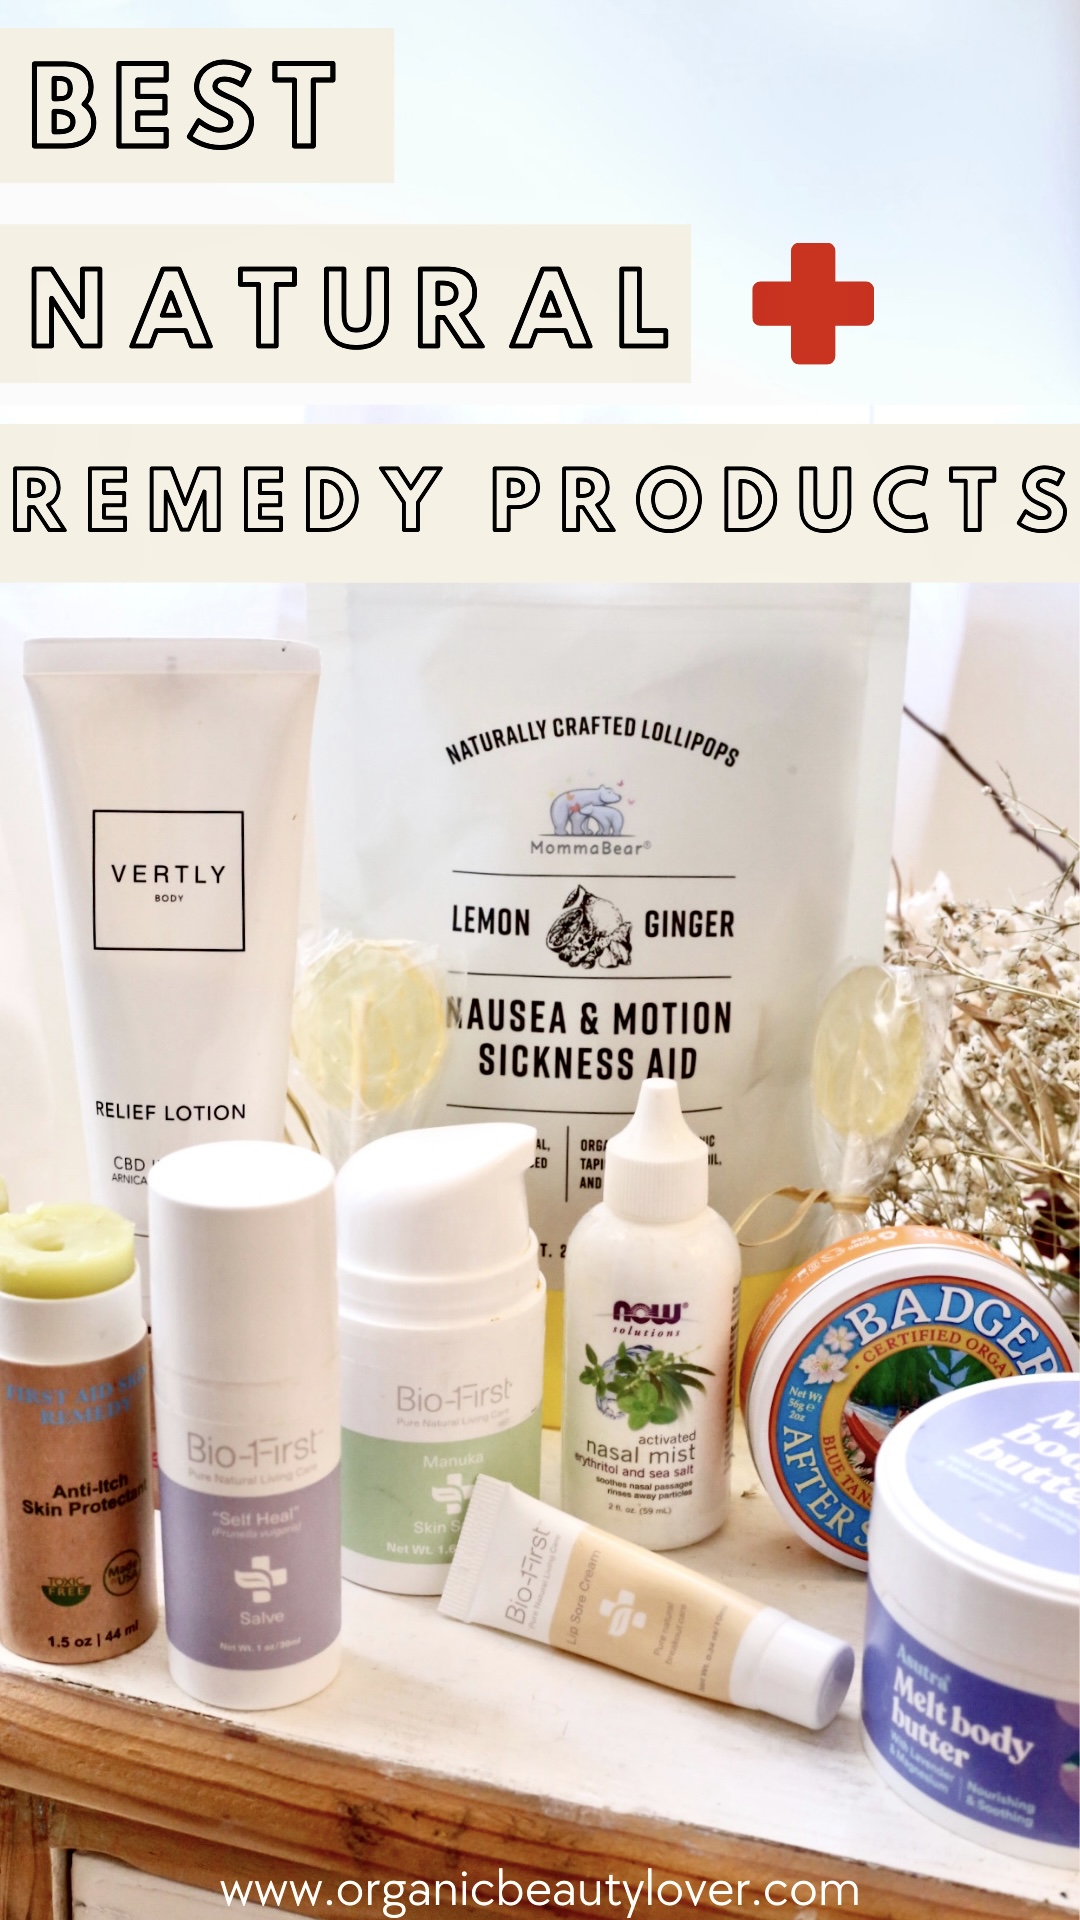 Best natural remedy products